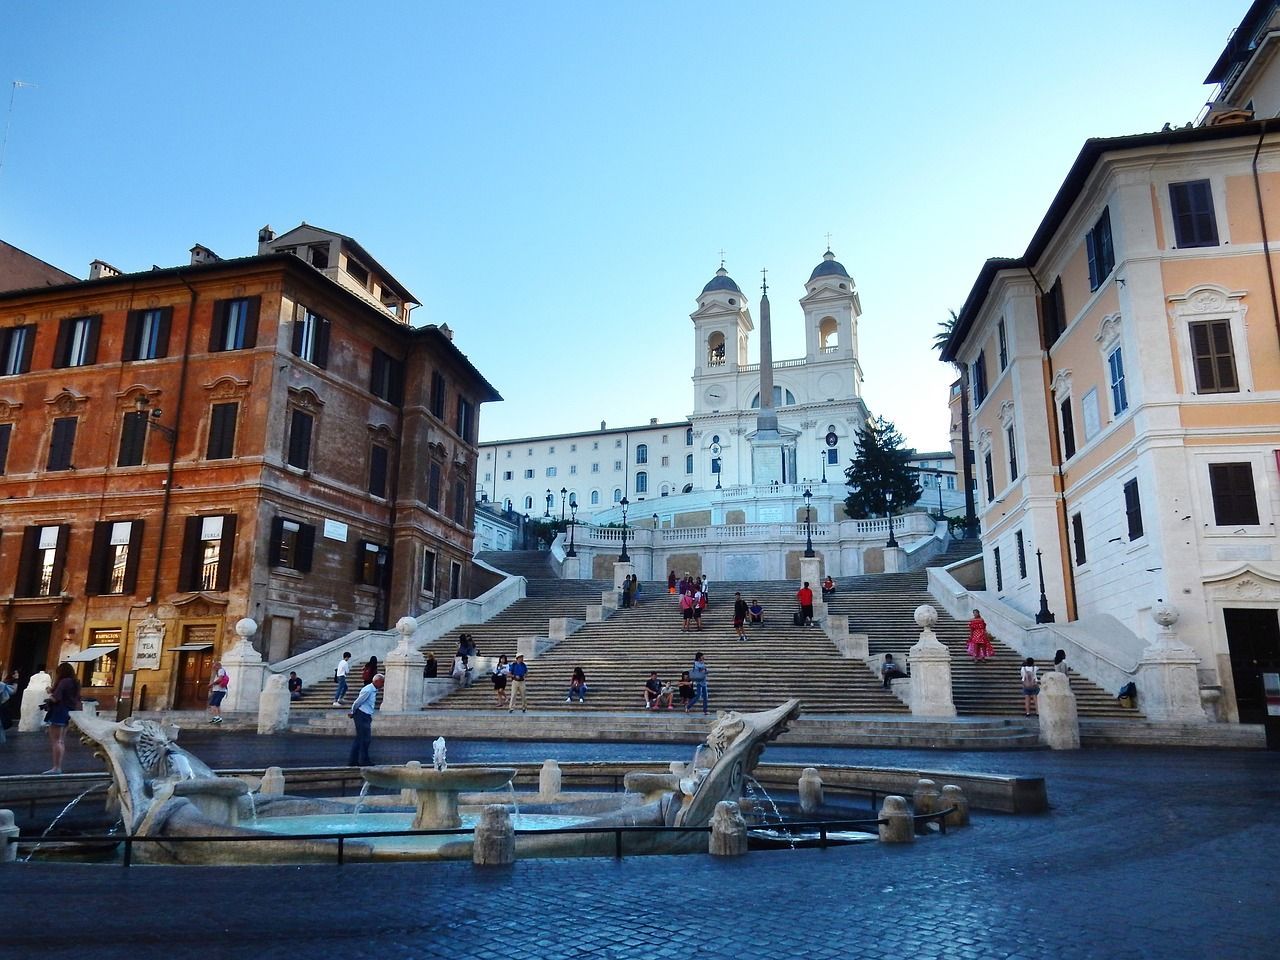 The Spanish Steps in Rome, bustling with tourists, leading up to the Trinità dei Monti church at the top, under a clear blue sky.